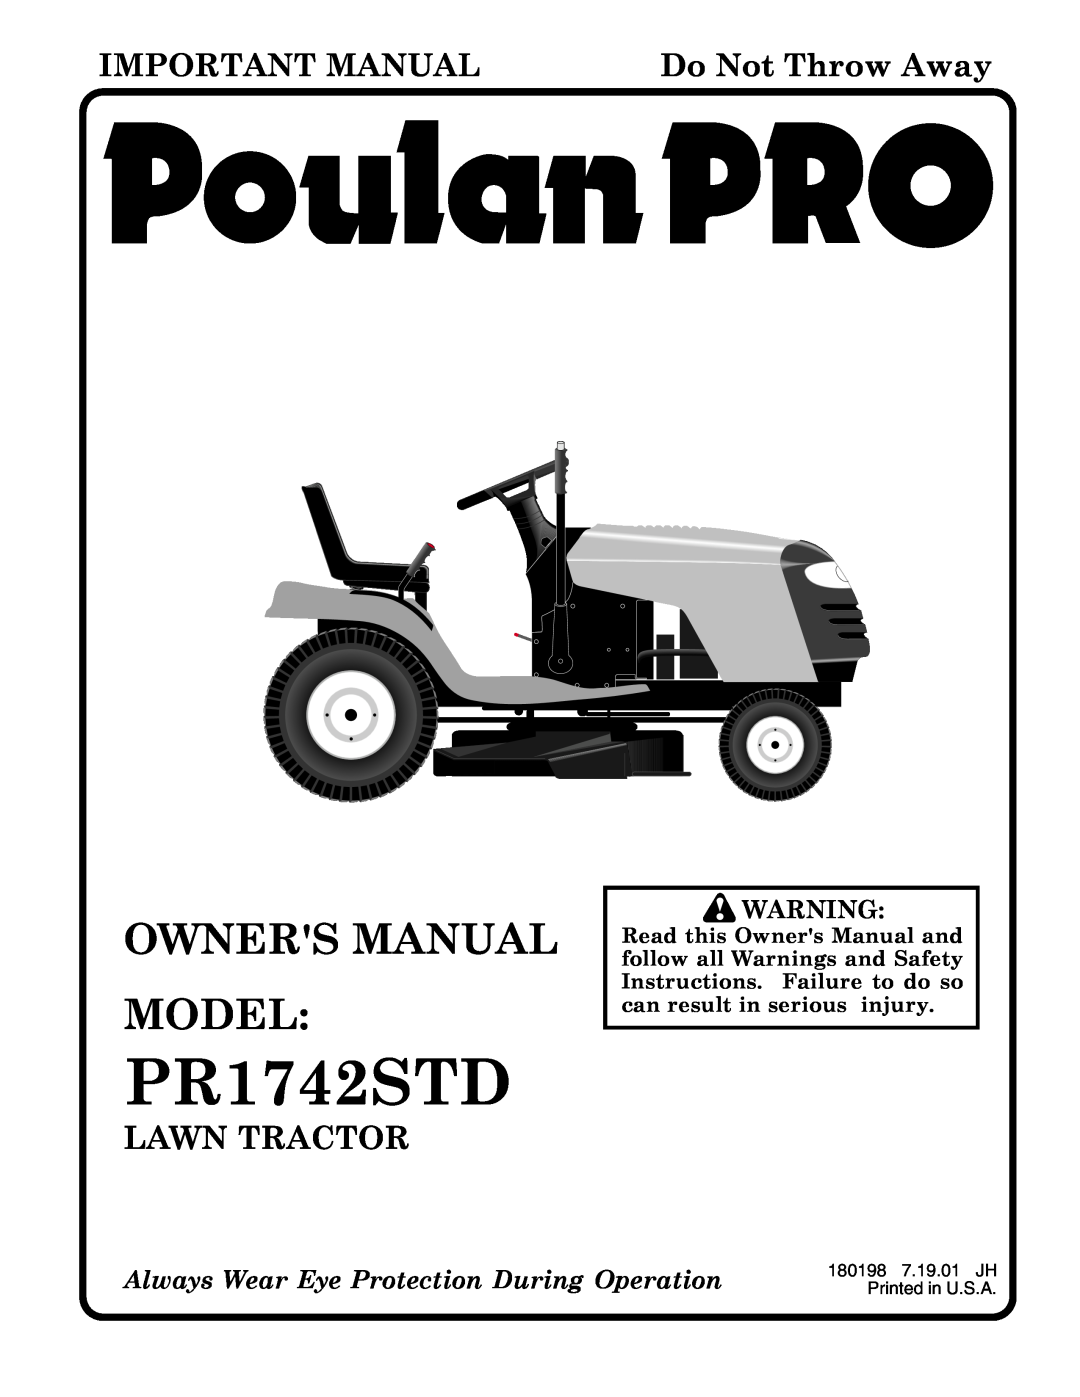 Poulan 180198 owner manual PR1742STD, Important Manual, Do Not Throw Away, Lawn Tractor 